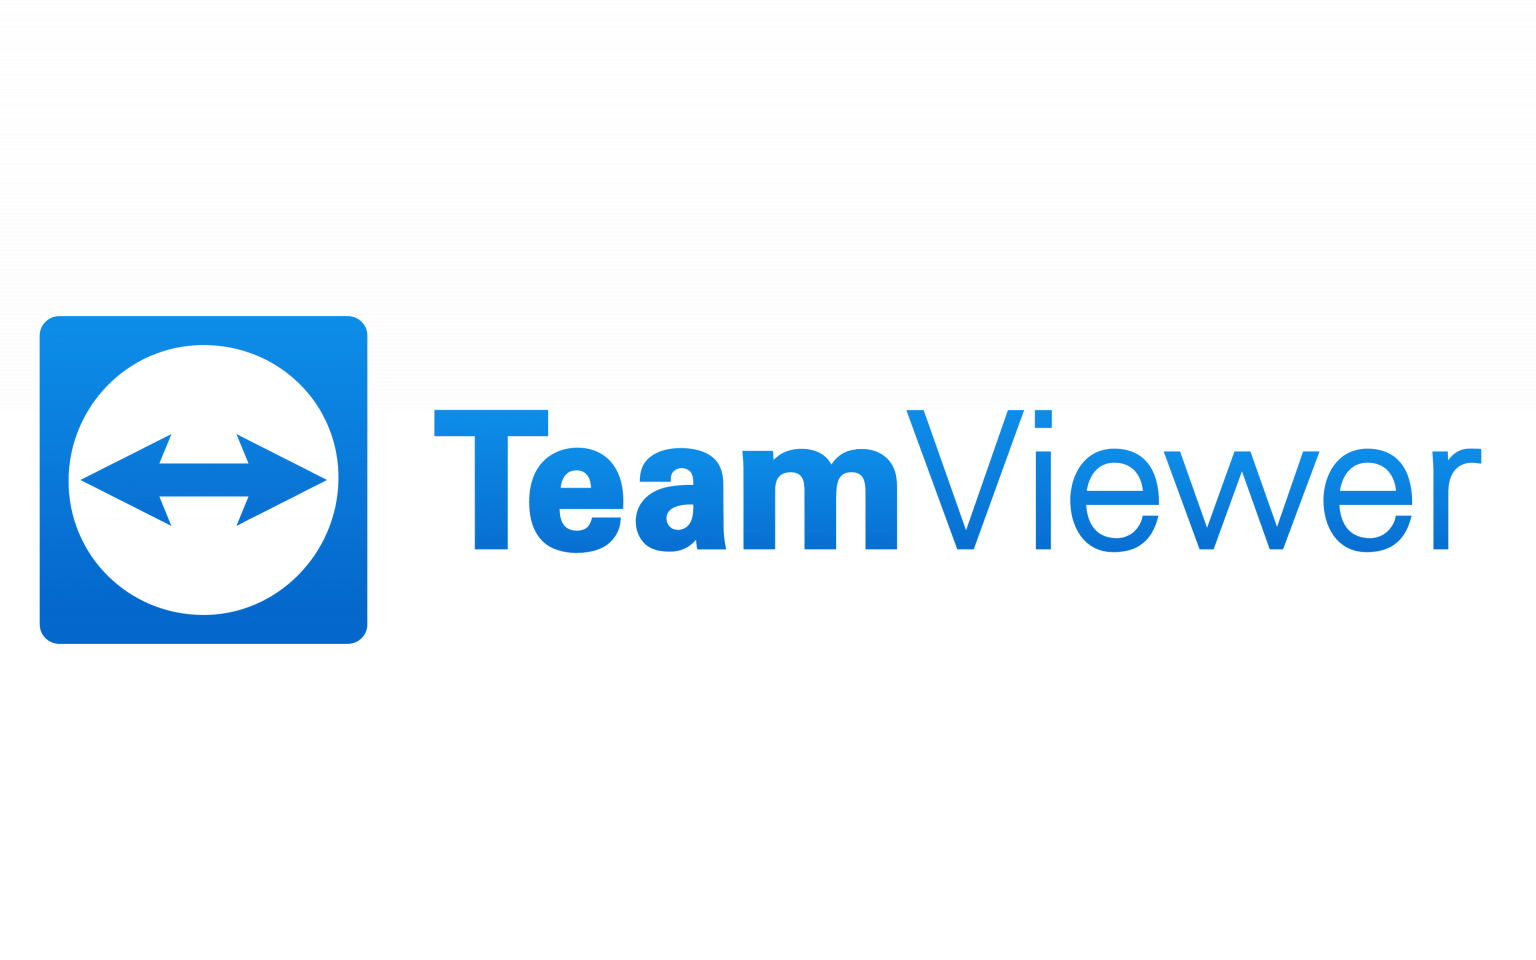 has teamviewer started charging for personal use